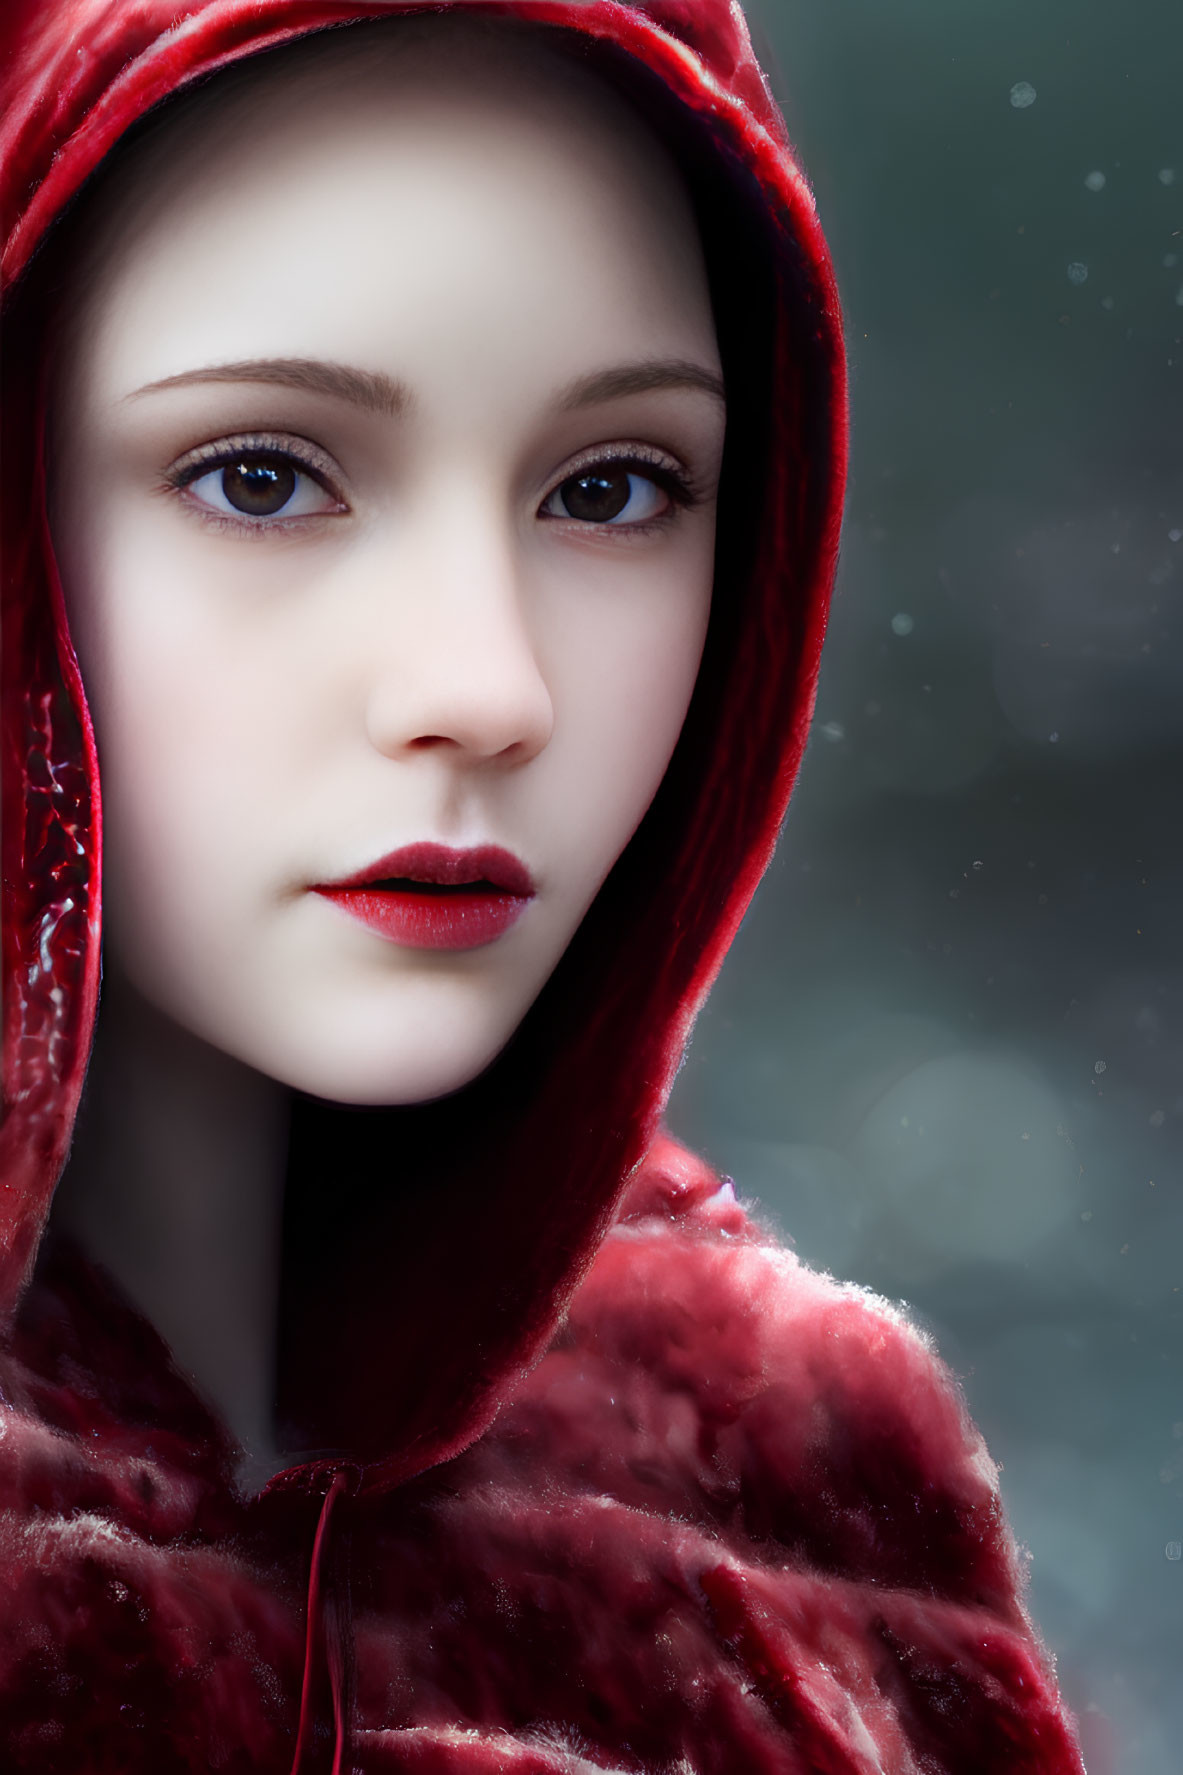 Pale-skinned person with blue eyes in red cloak against snowy background